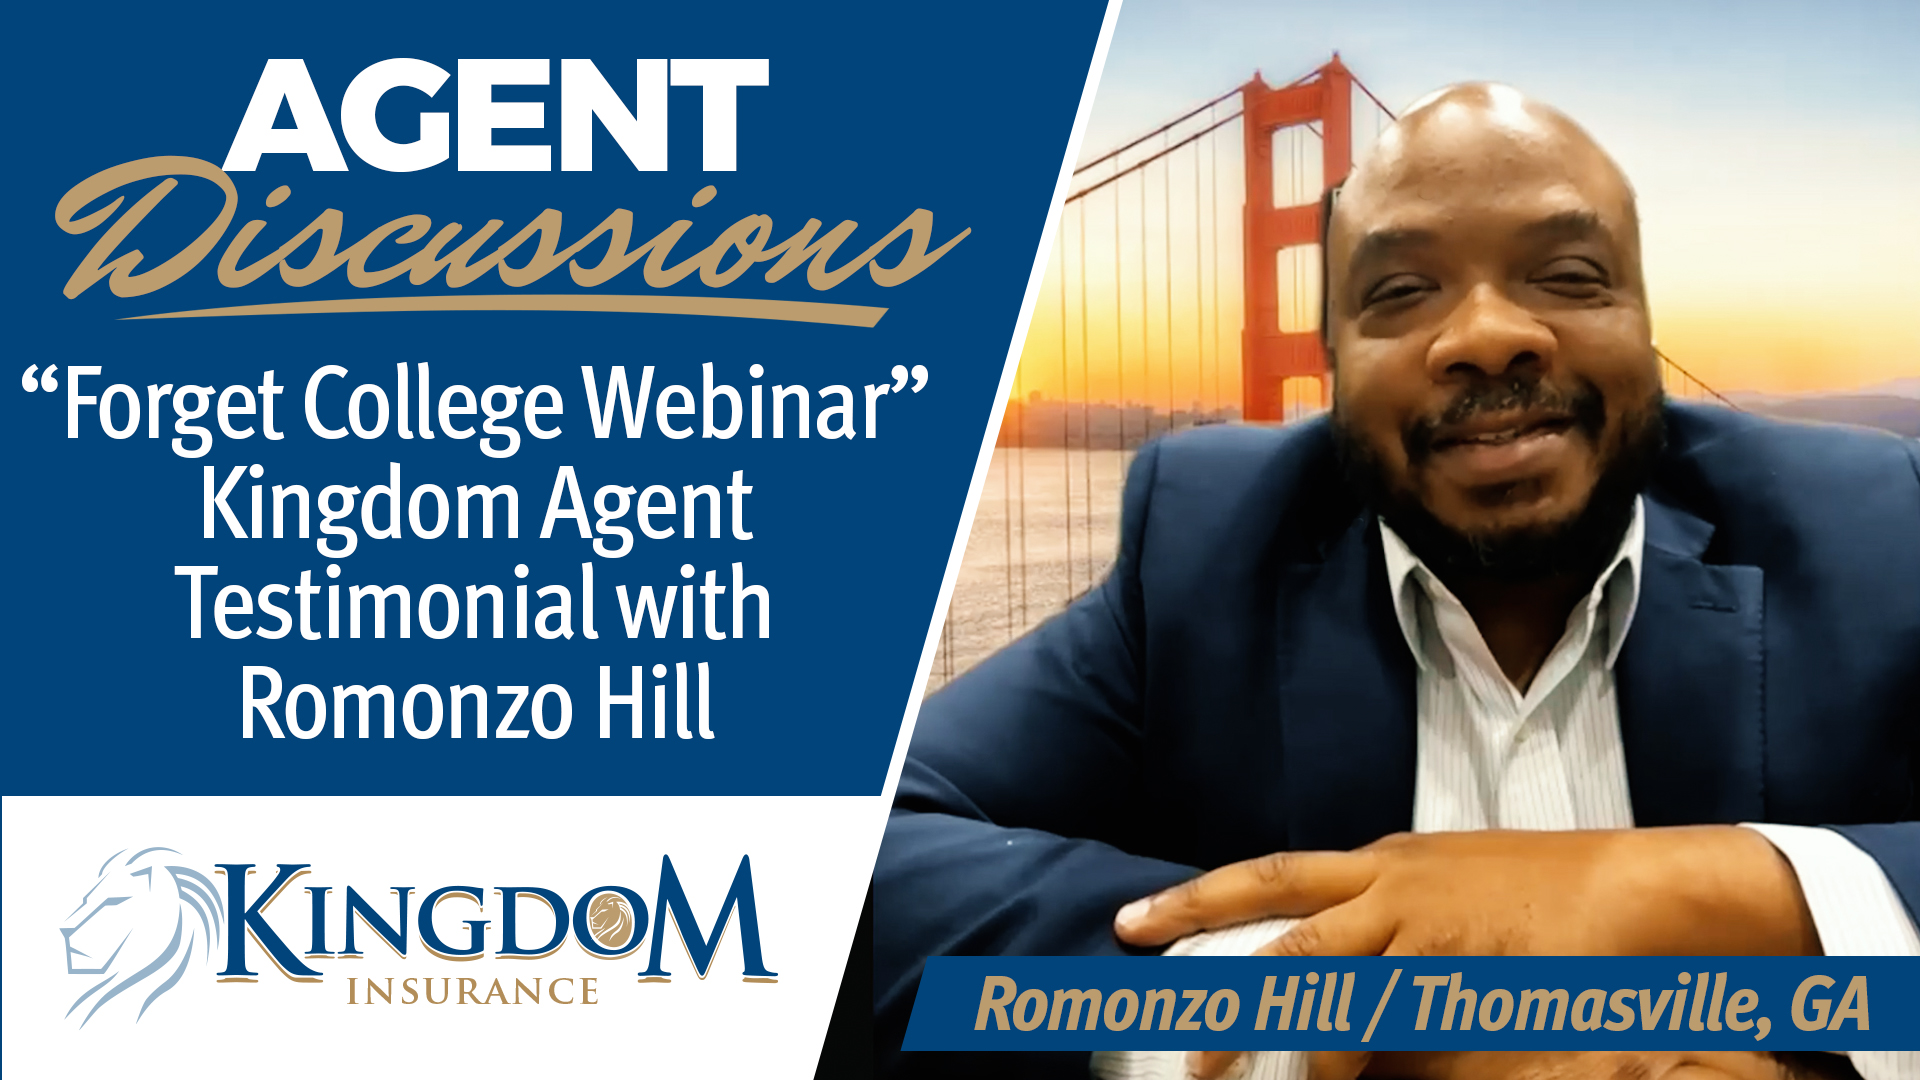 Kingdom Agent Discussion 2023 with Romonzo Hill